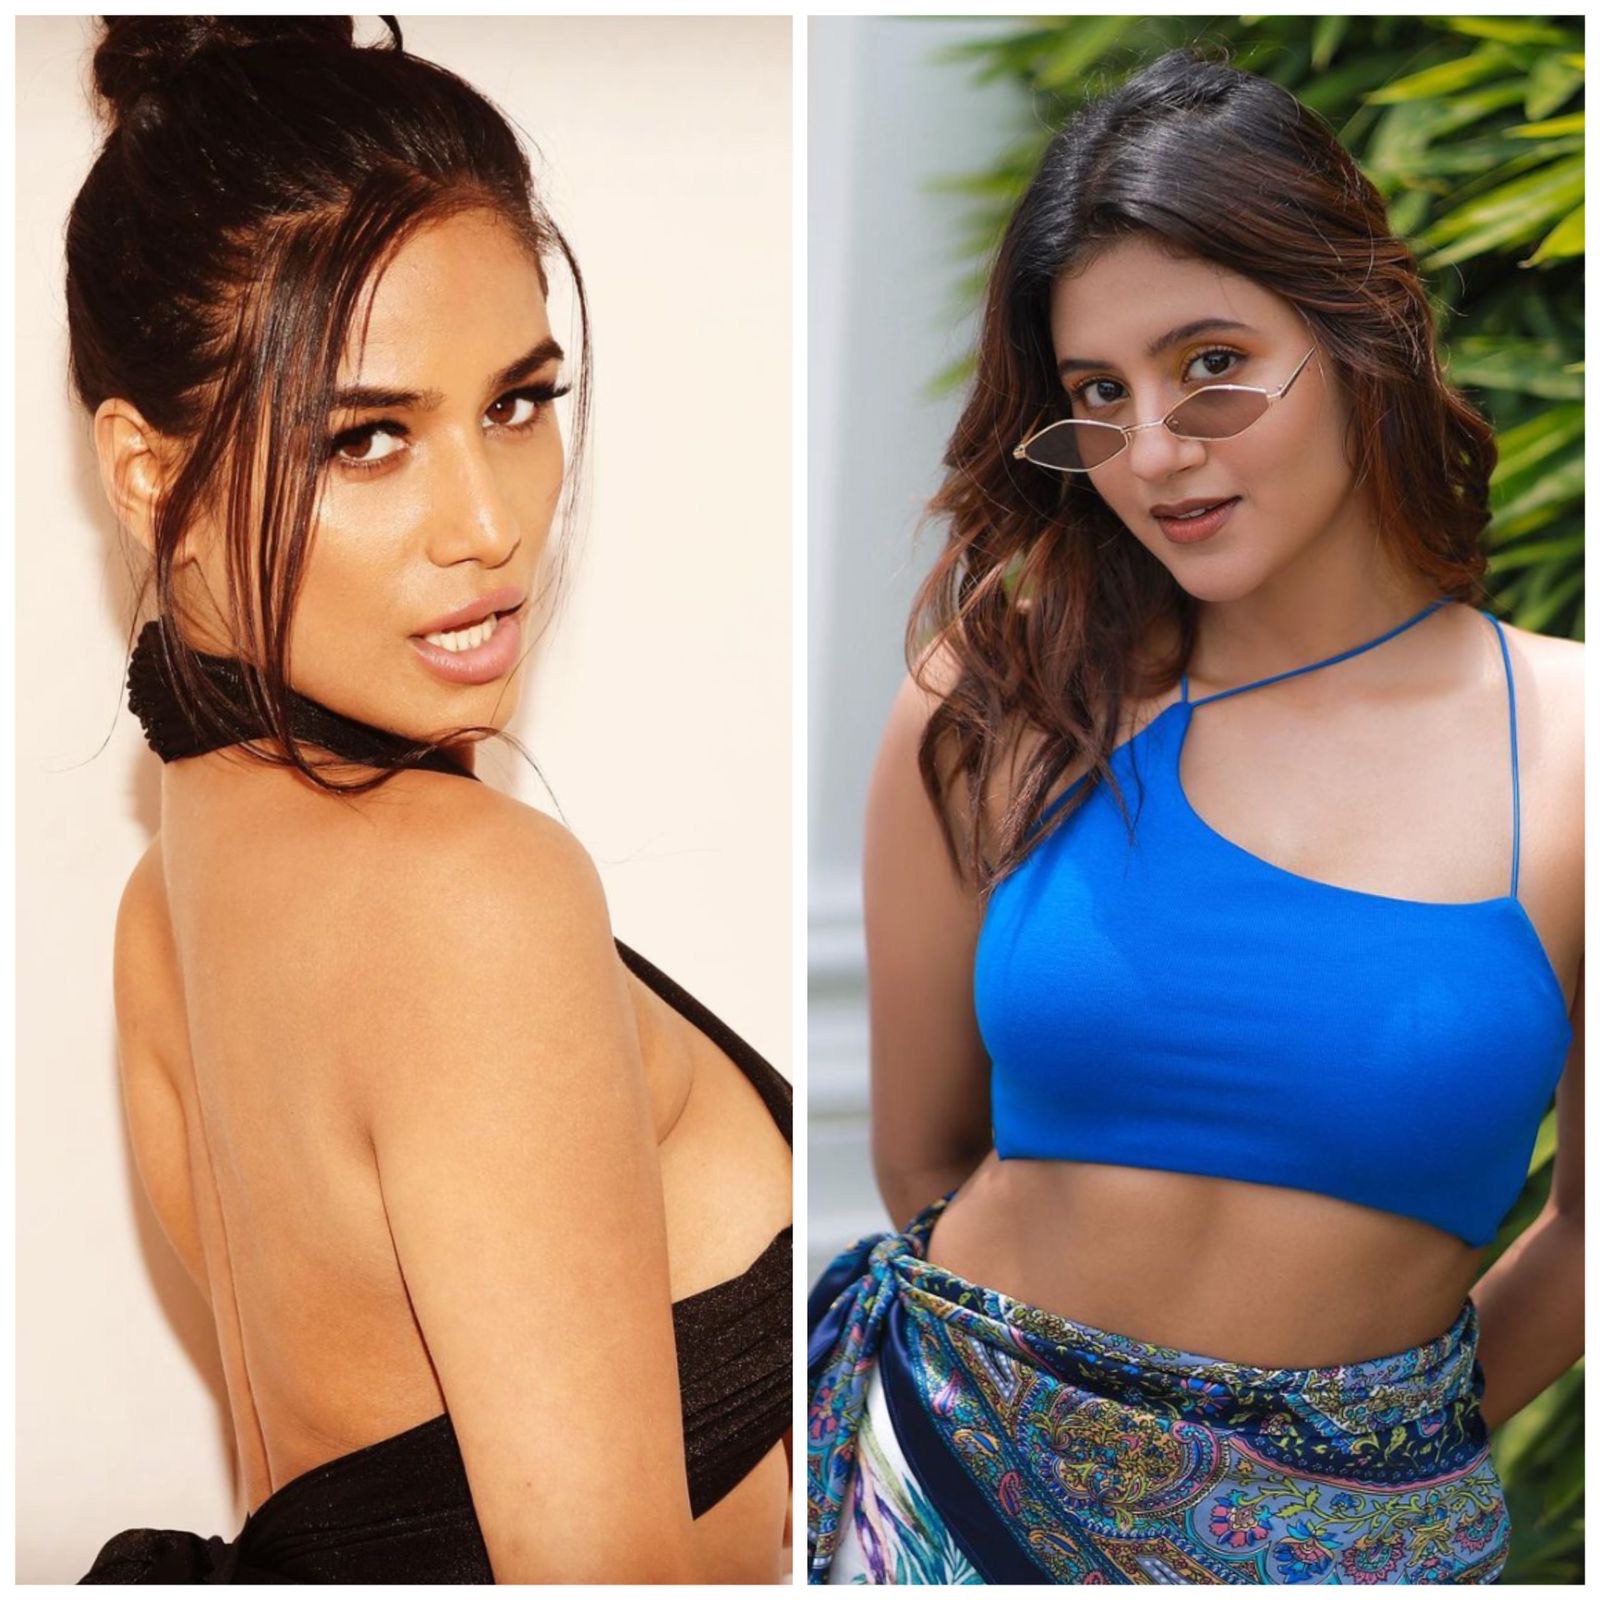 Lock Upp fame Anjali Arora reacts to the sudden demise of friend Poonam Pandey Says, "It's hard to accept she's no longer with us